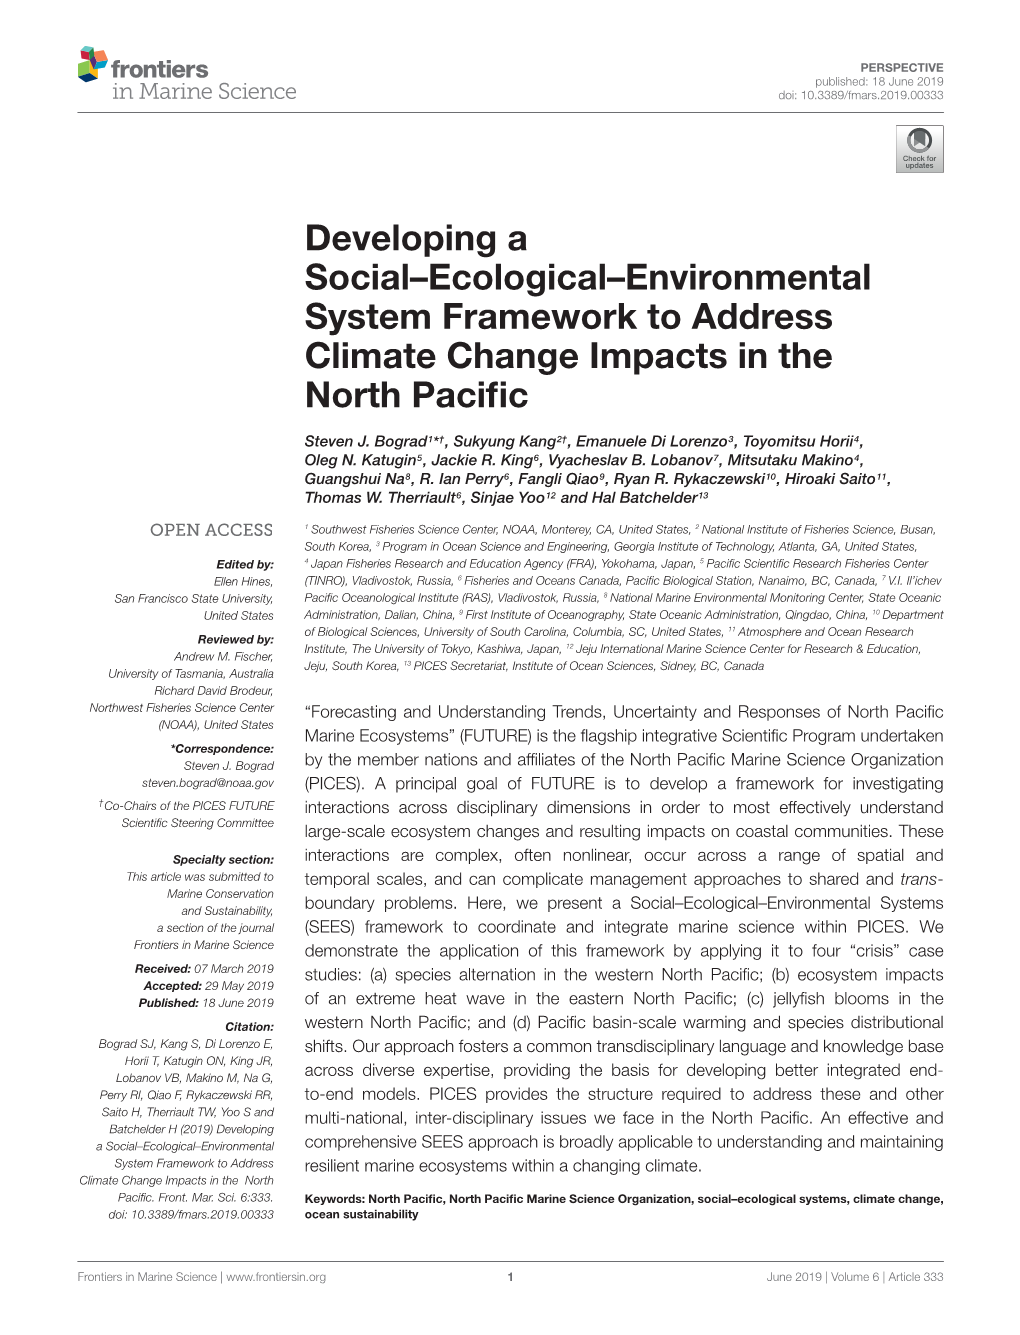 Developing a Social–Ecological–Environmental System Framework to Address Climate Change Impacts in the North Paciﬁc